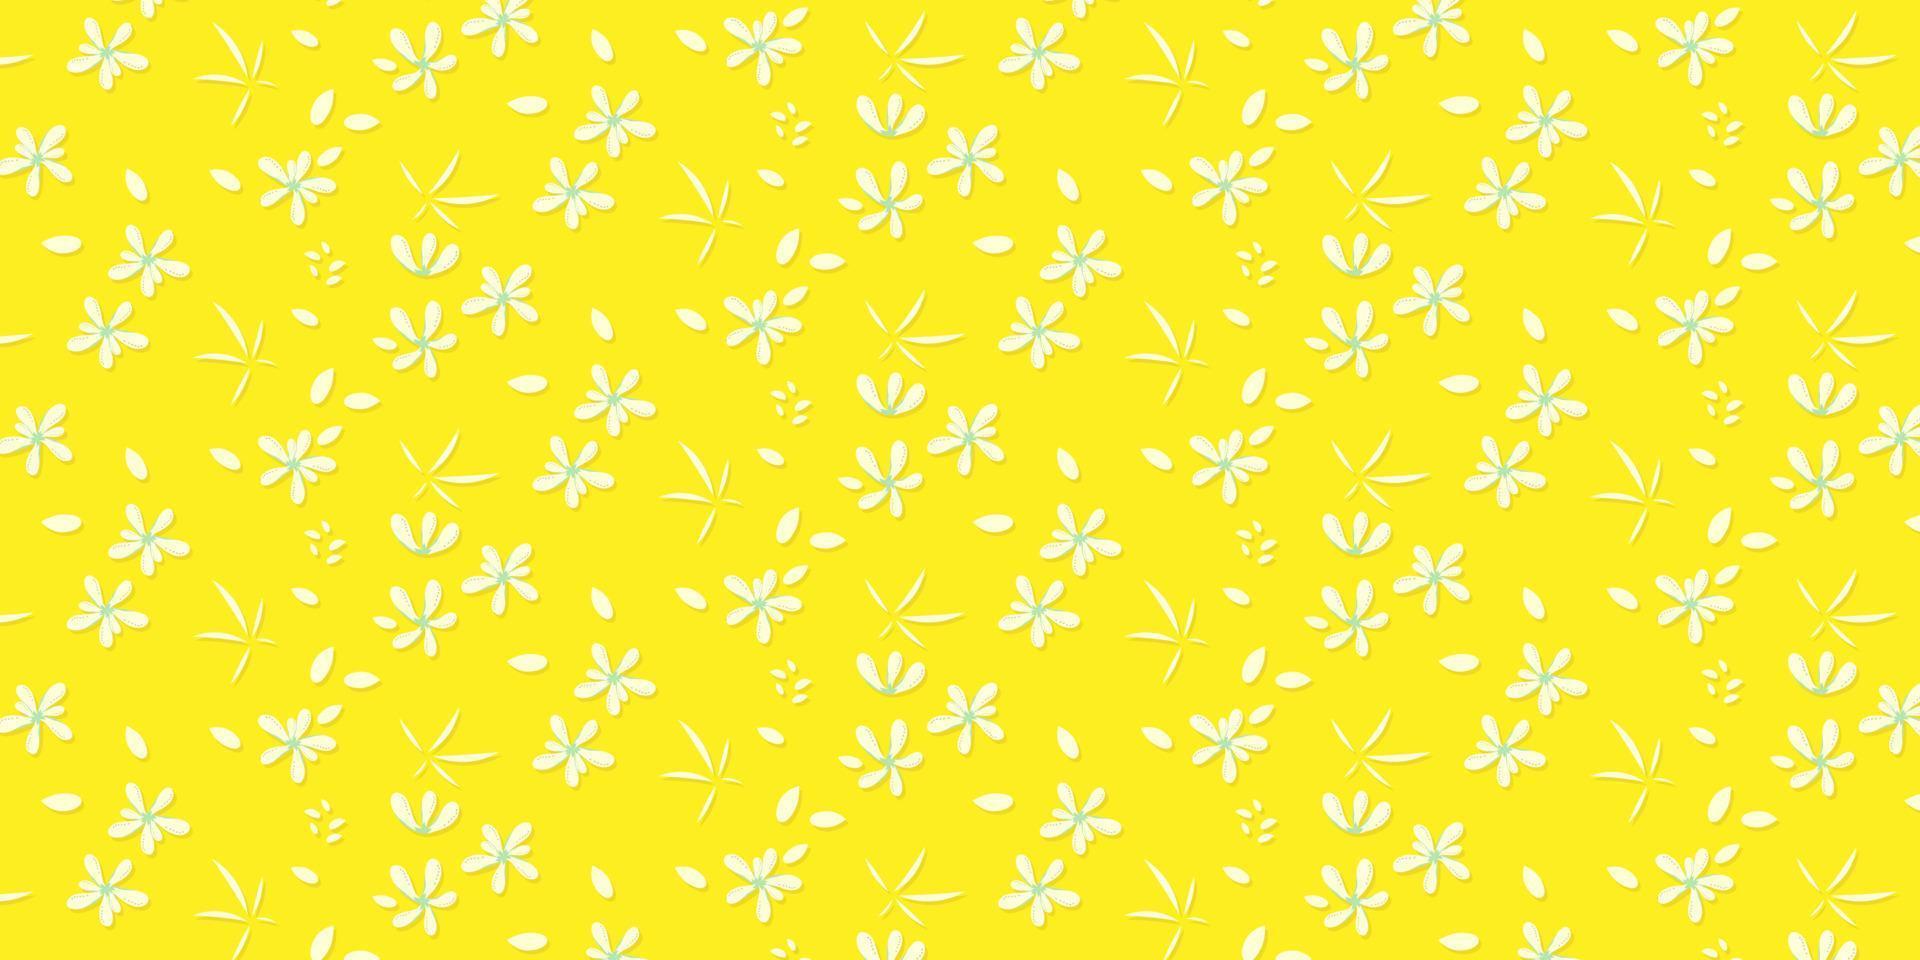 Falling daisy flower abstract pattern. Scattered flat flower illustration on yellow background. High contrast color. Find fill pattern on swatches vector